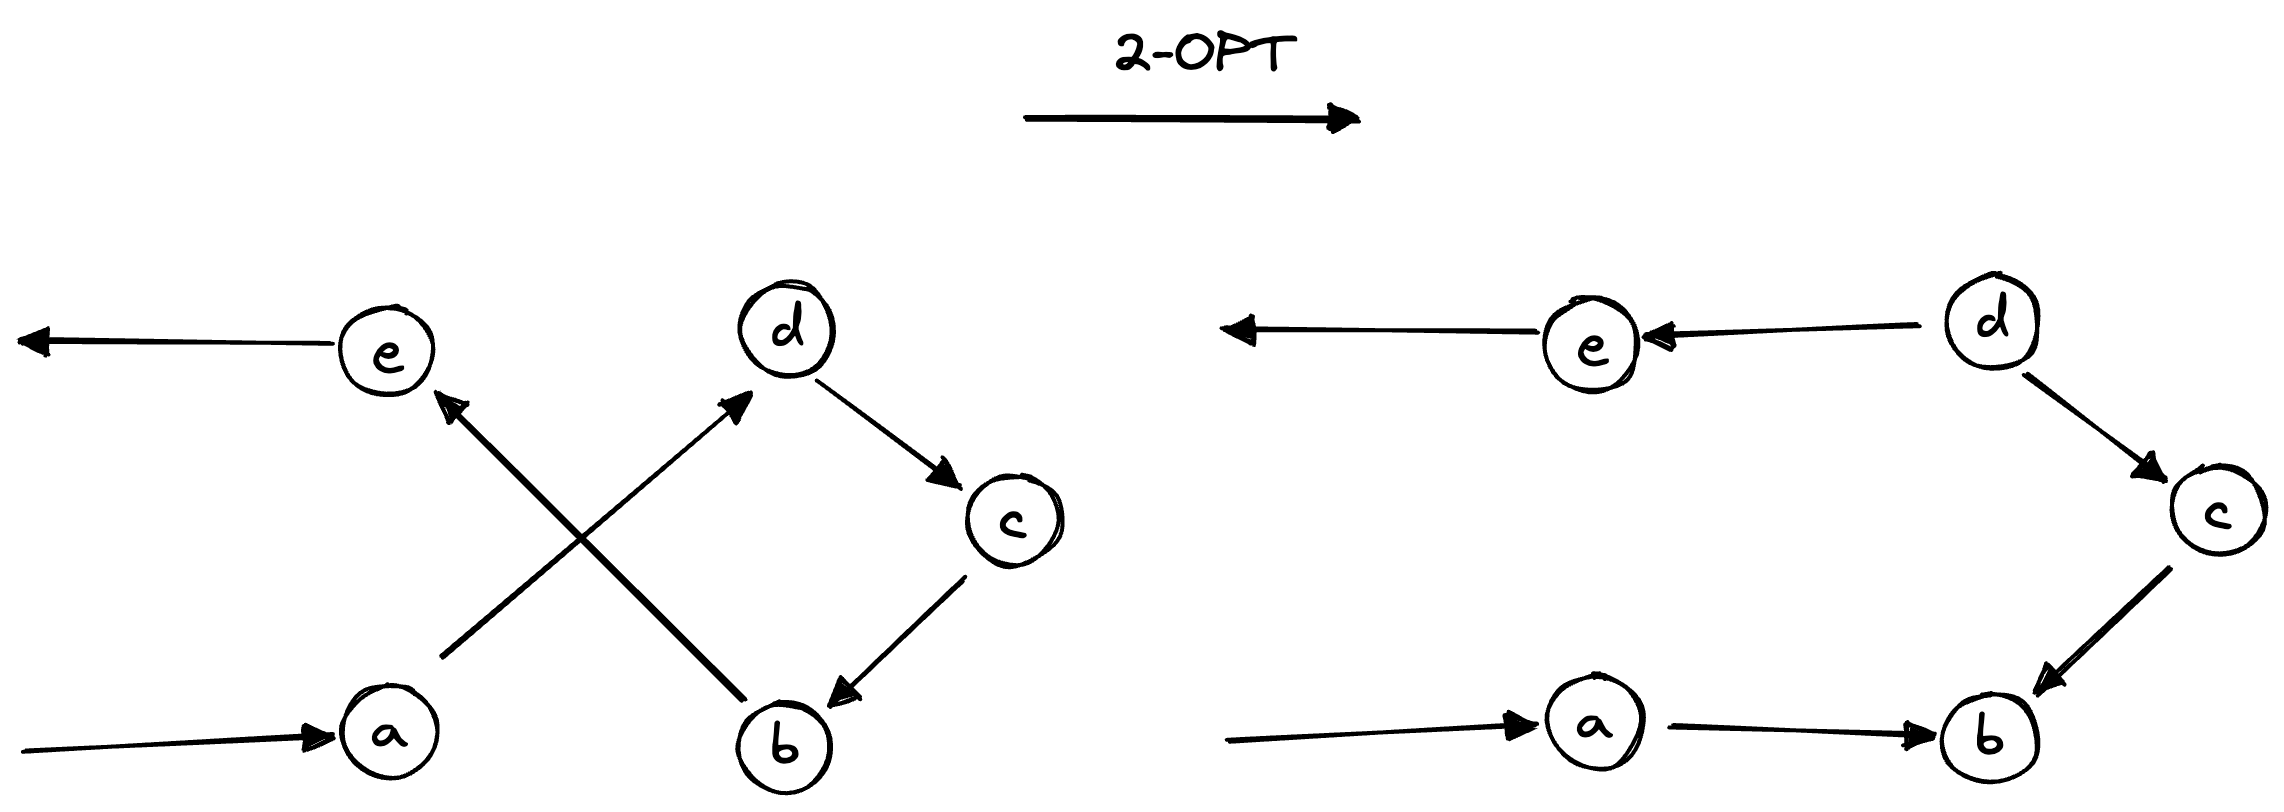 Diagram of the impact of a 2-opt movement.